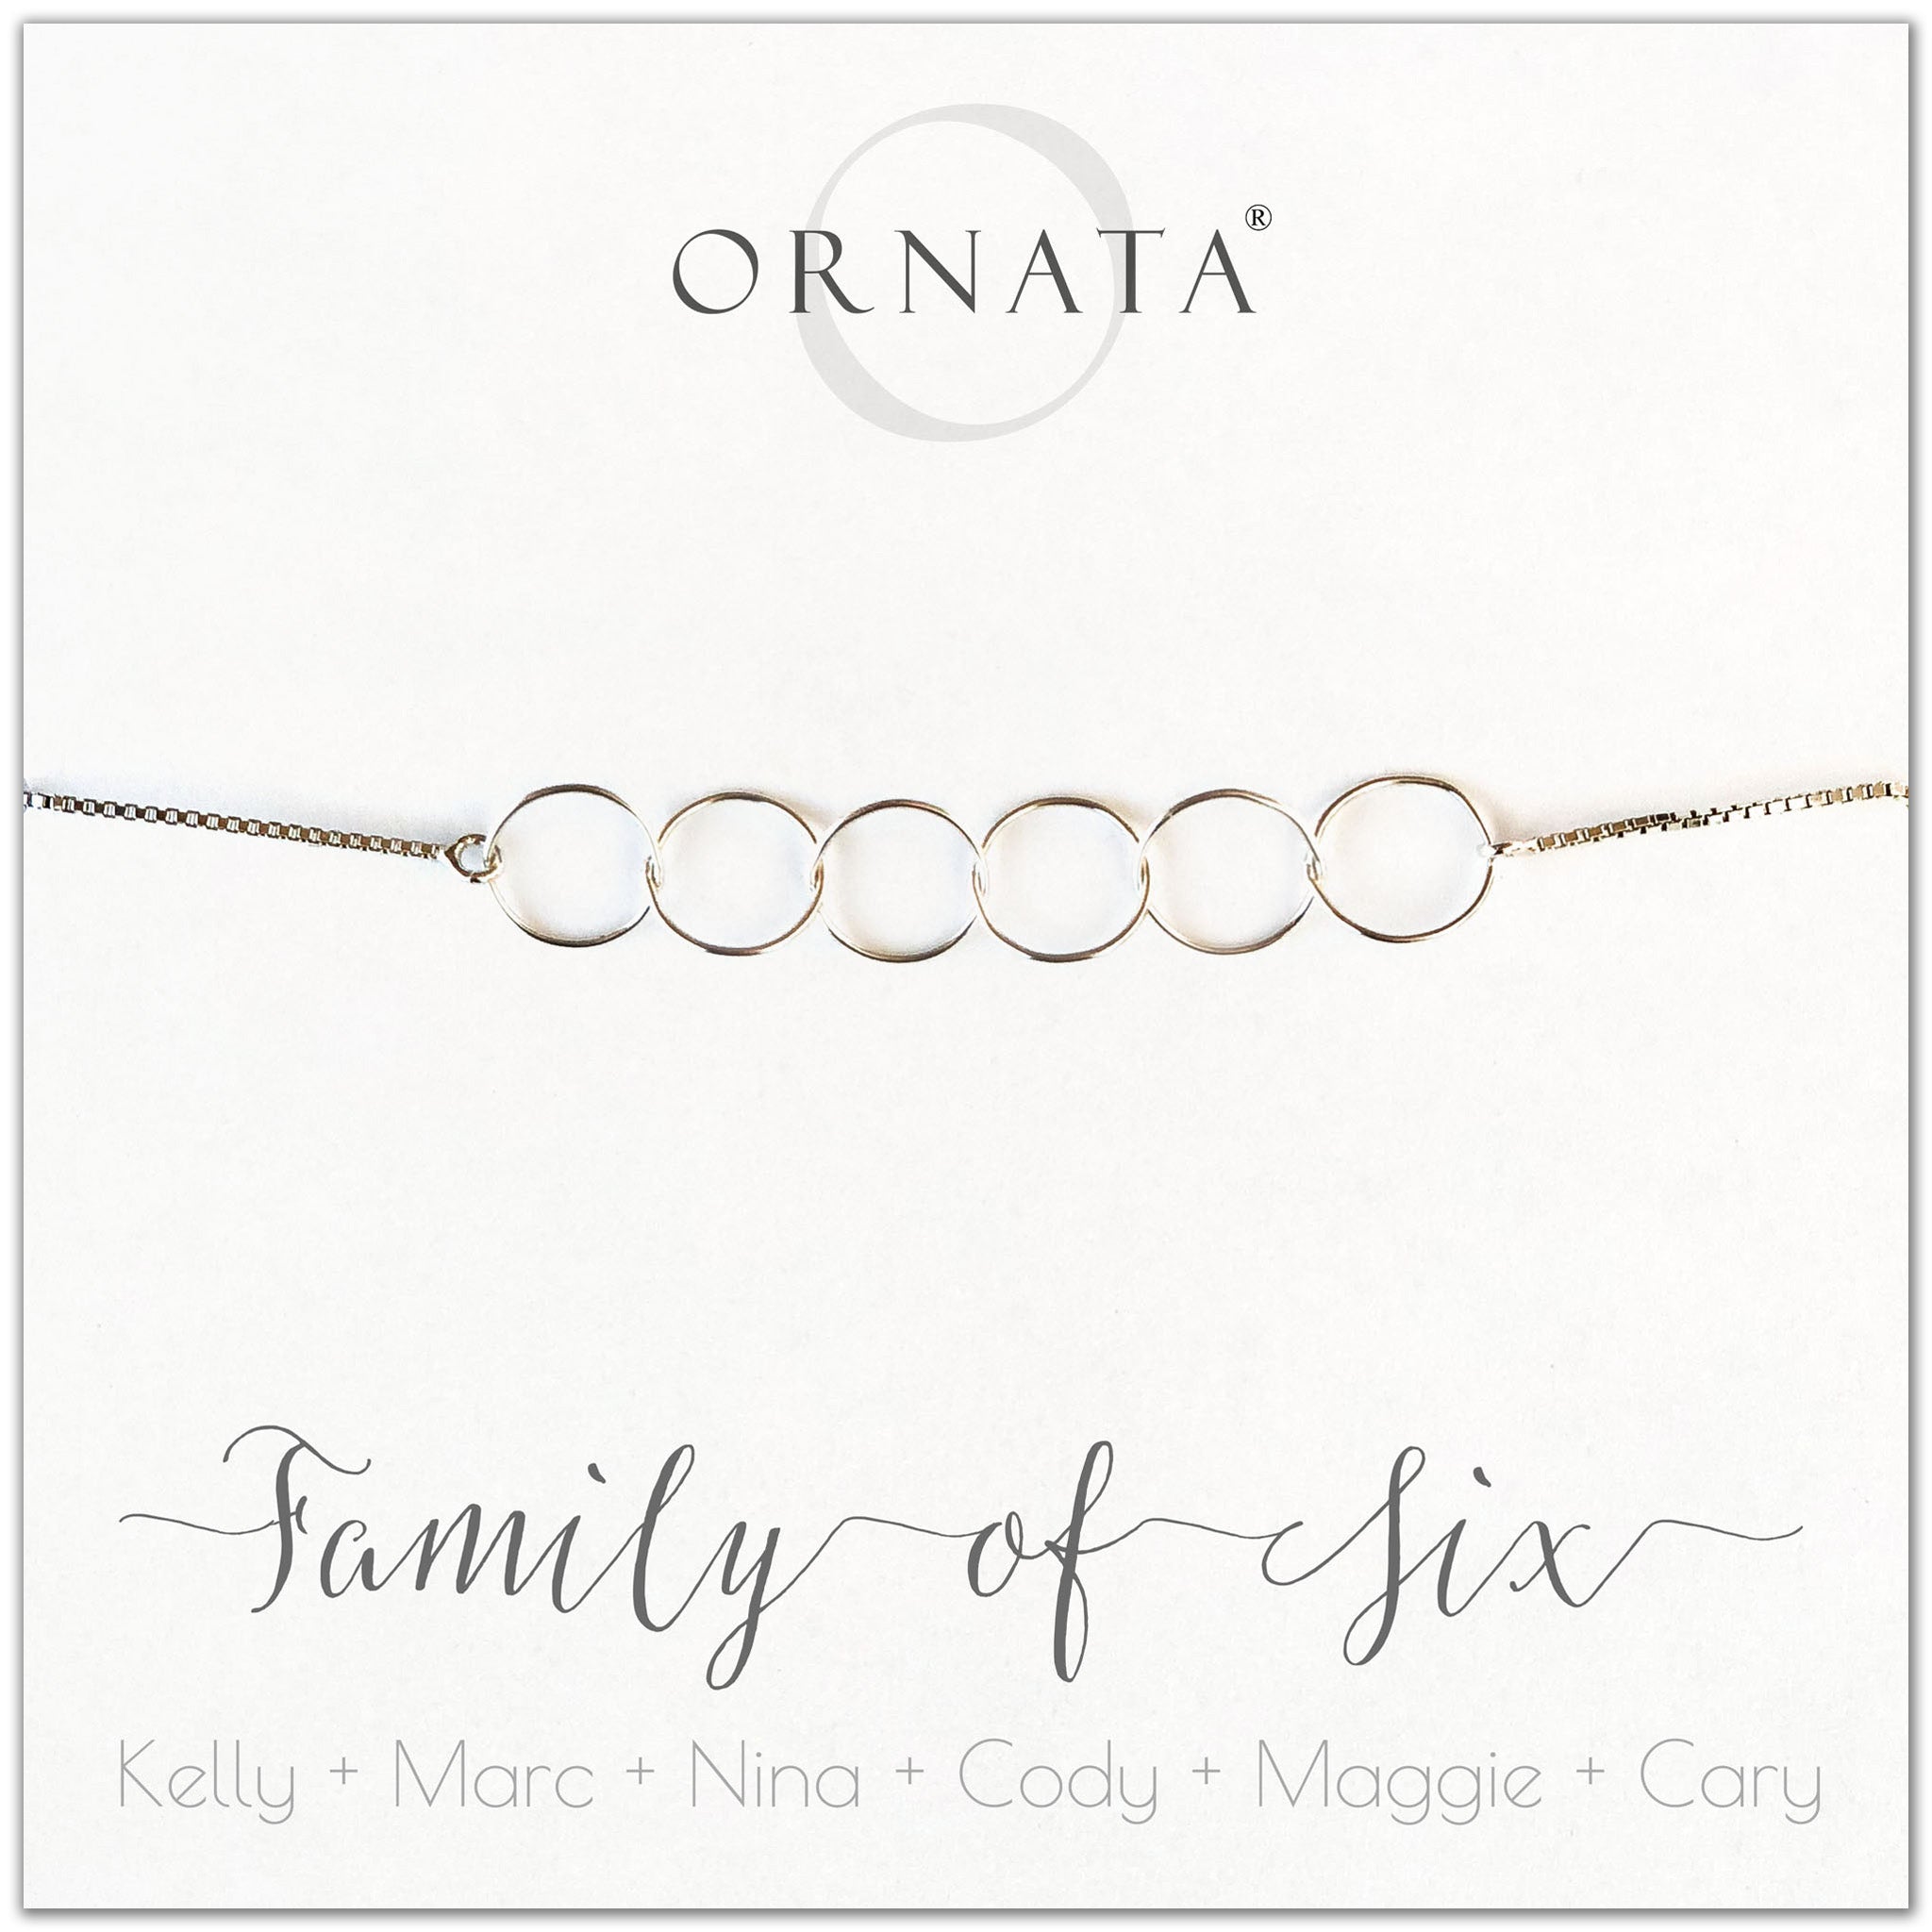 Family of six personalized sterling silver bolo bracelet. Our custom bracelets make good gifts for new families, mothers, and newlyweds. Great bridal shower gift, wedding gift, or baby shower gift. Also good mother’s day gift. 